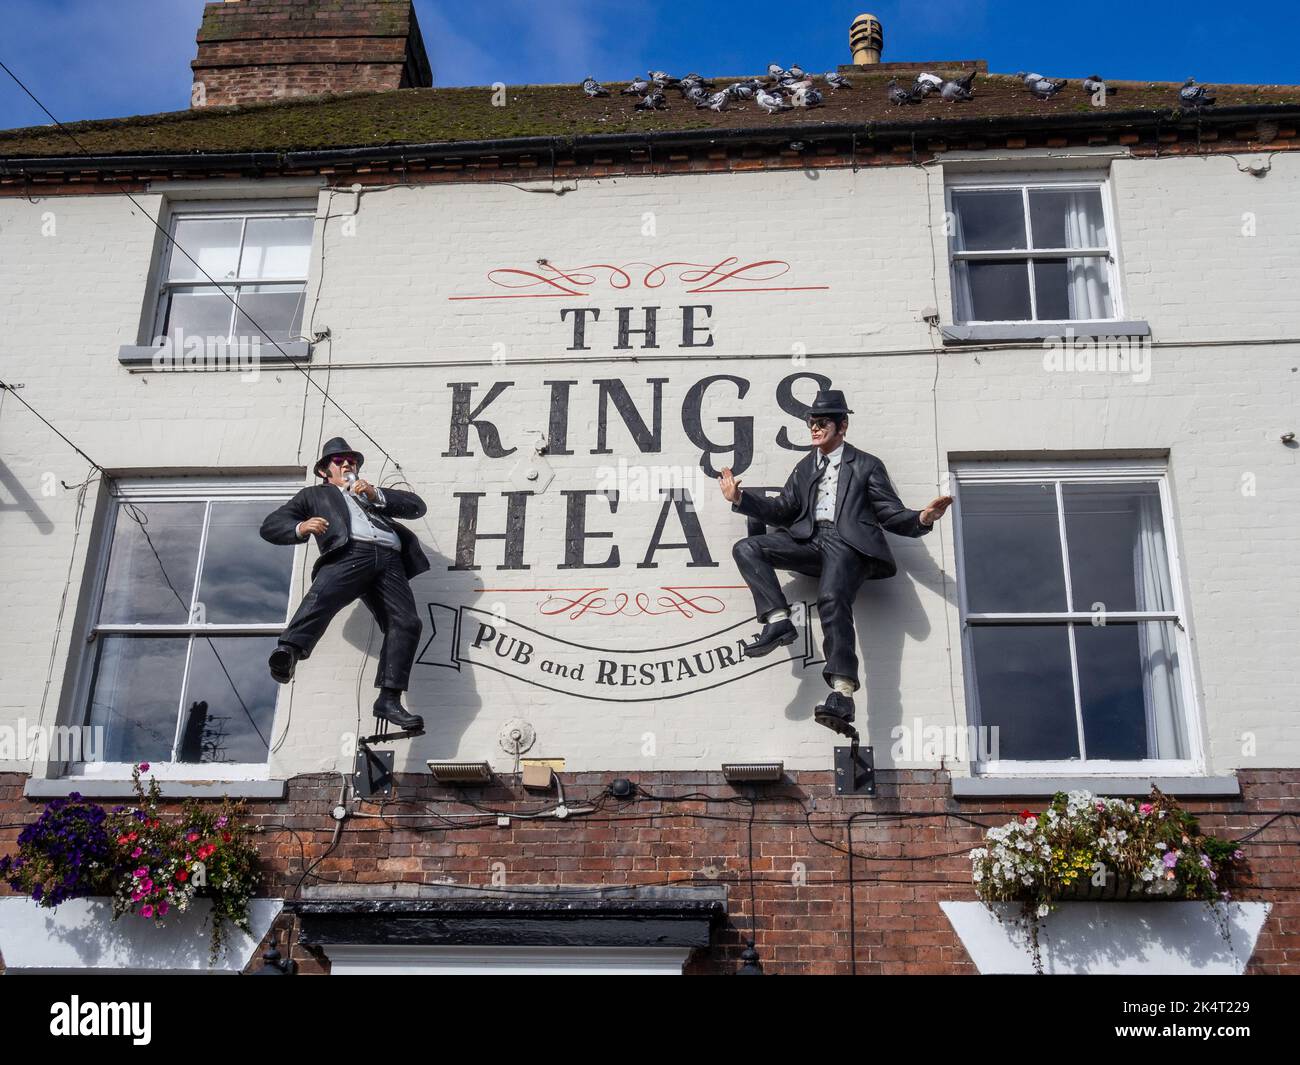 The Kings Head pub and restaurant, with Blues Brothers figures decorating the outside, Upton Upon Severn, Worcestershire, UK Stock Photo